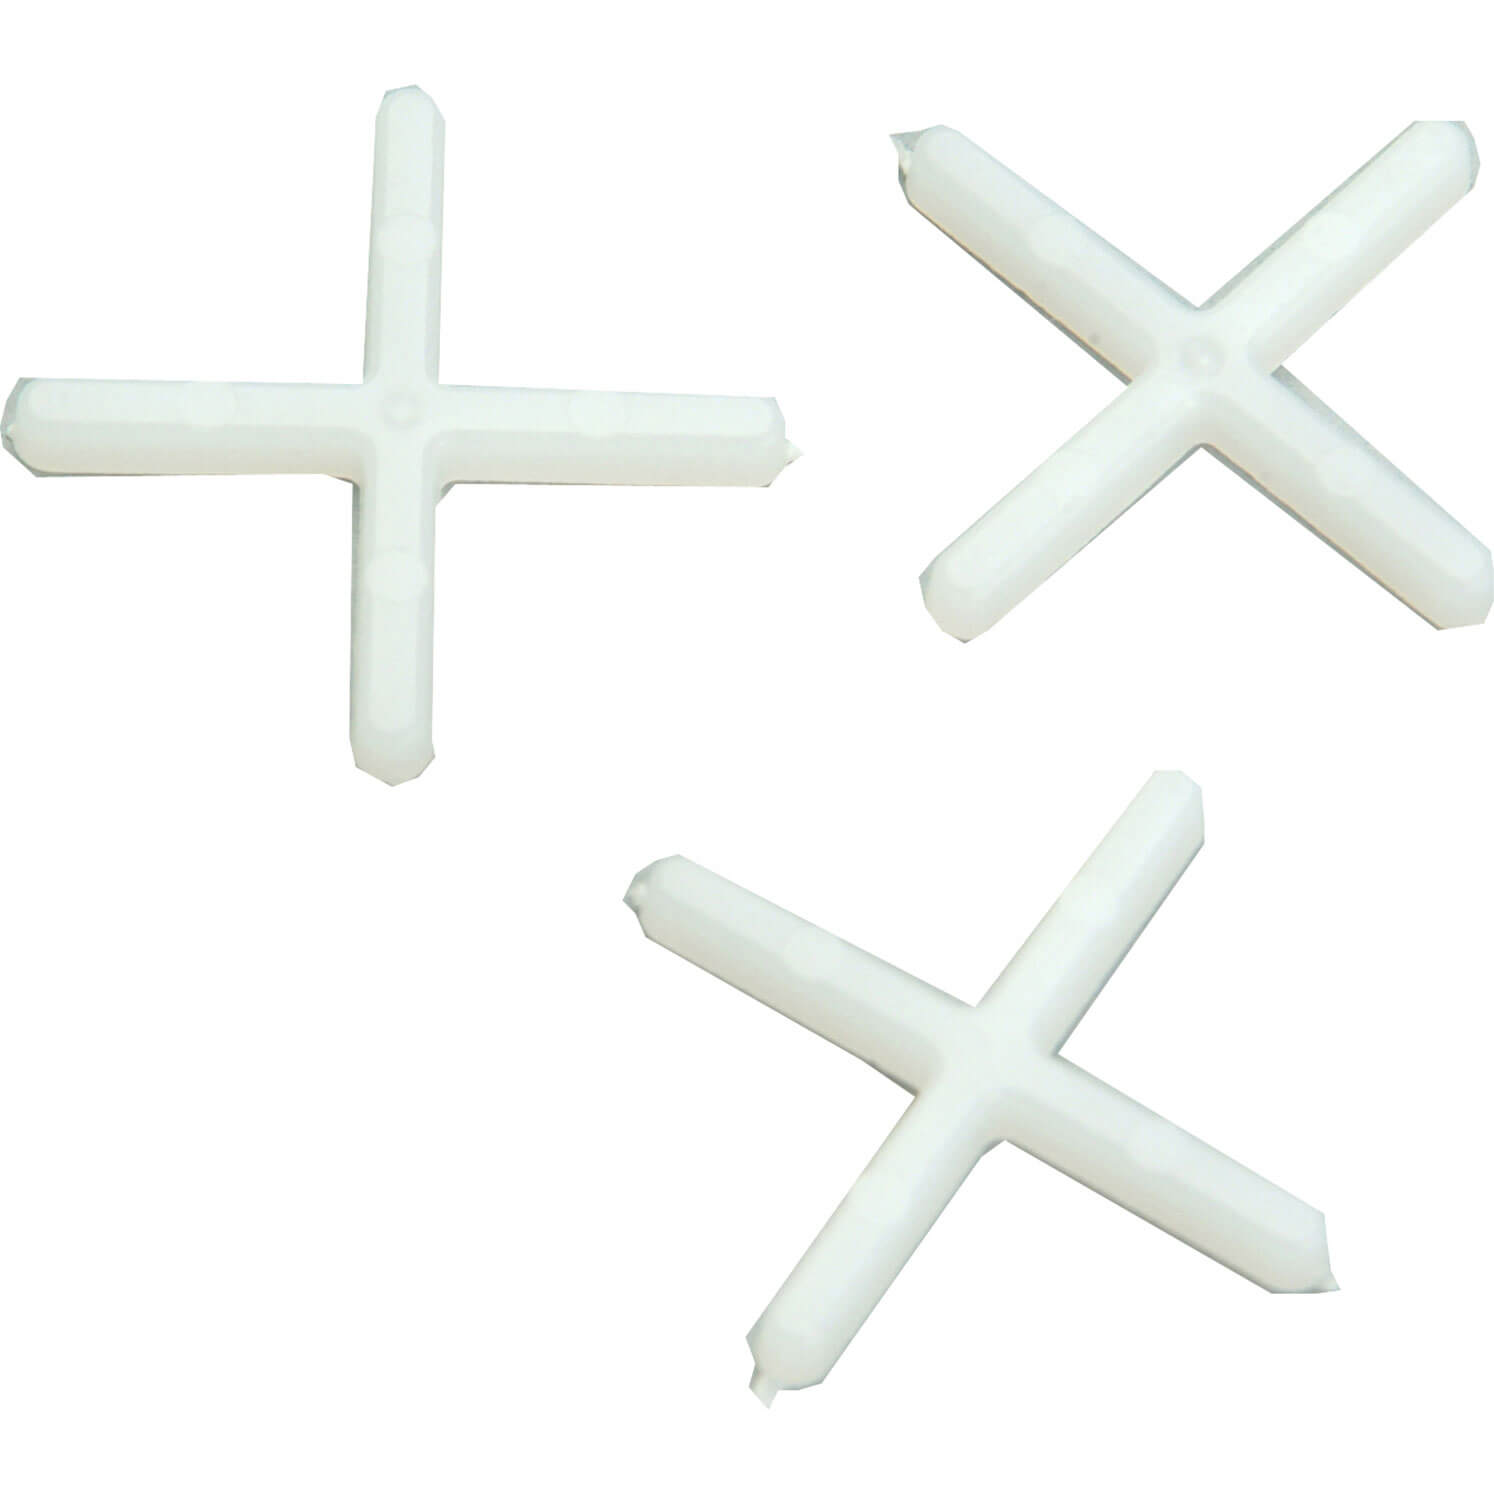 Image of Vitrex Plastic Wall Tile Spacers 1.5mm Pack of 500